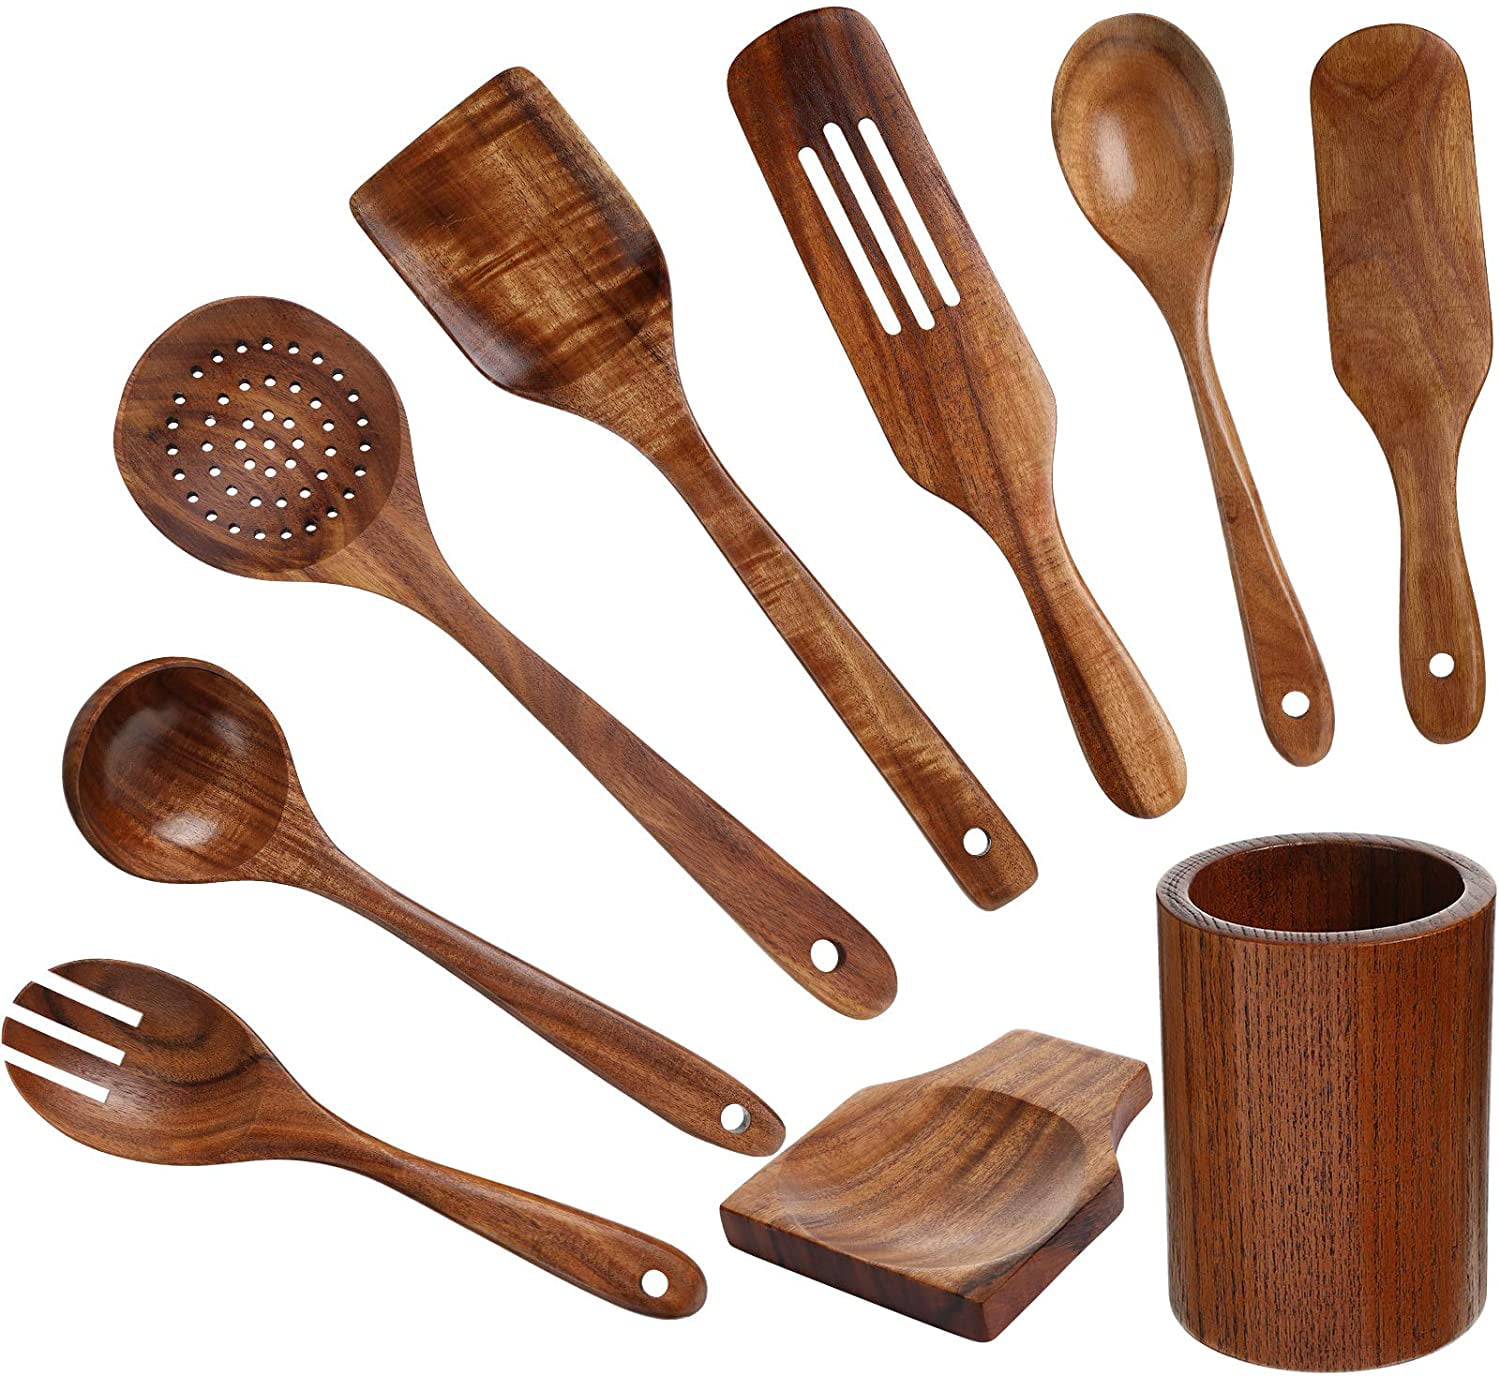 9 Pieces Wooden Kitchen Cooking Utensils Set Natural Teak Wood Spoons Spatula Spoon Rest and Kitchenware Storage Bucket Cookware Utensil Tools for Kitchen 